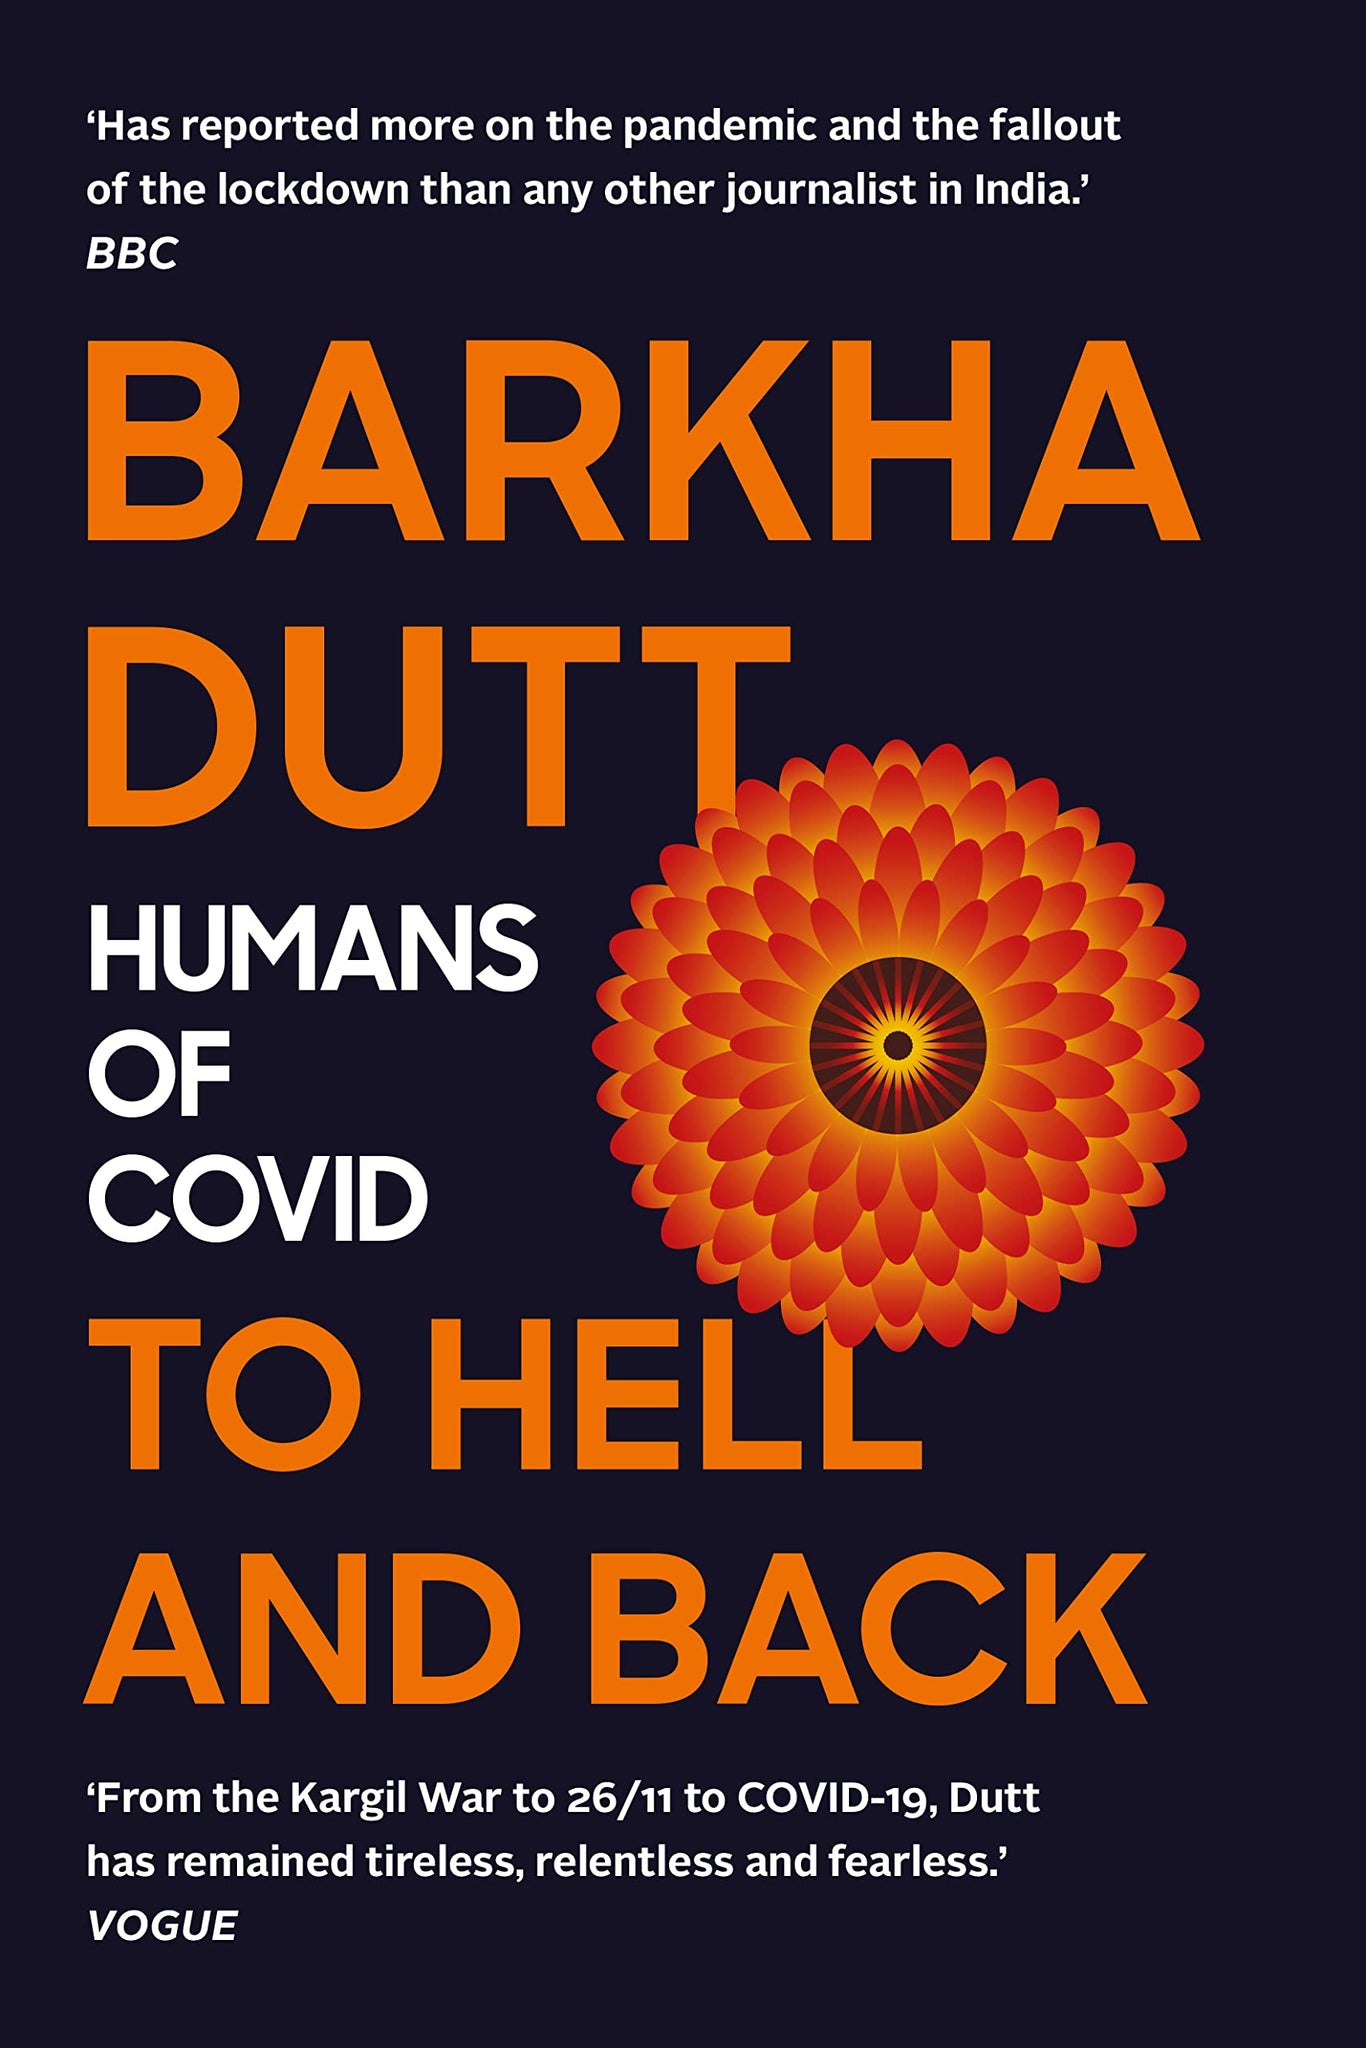 To Hell And Back: Humans Of COVID